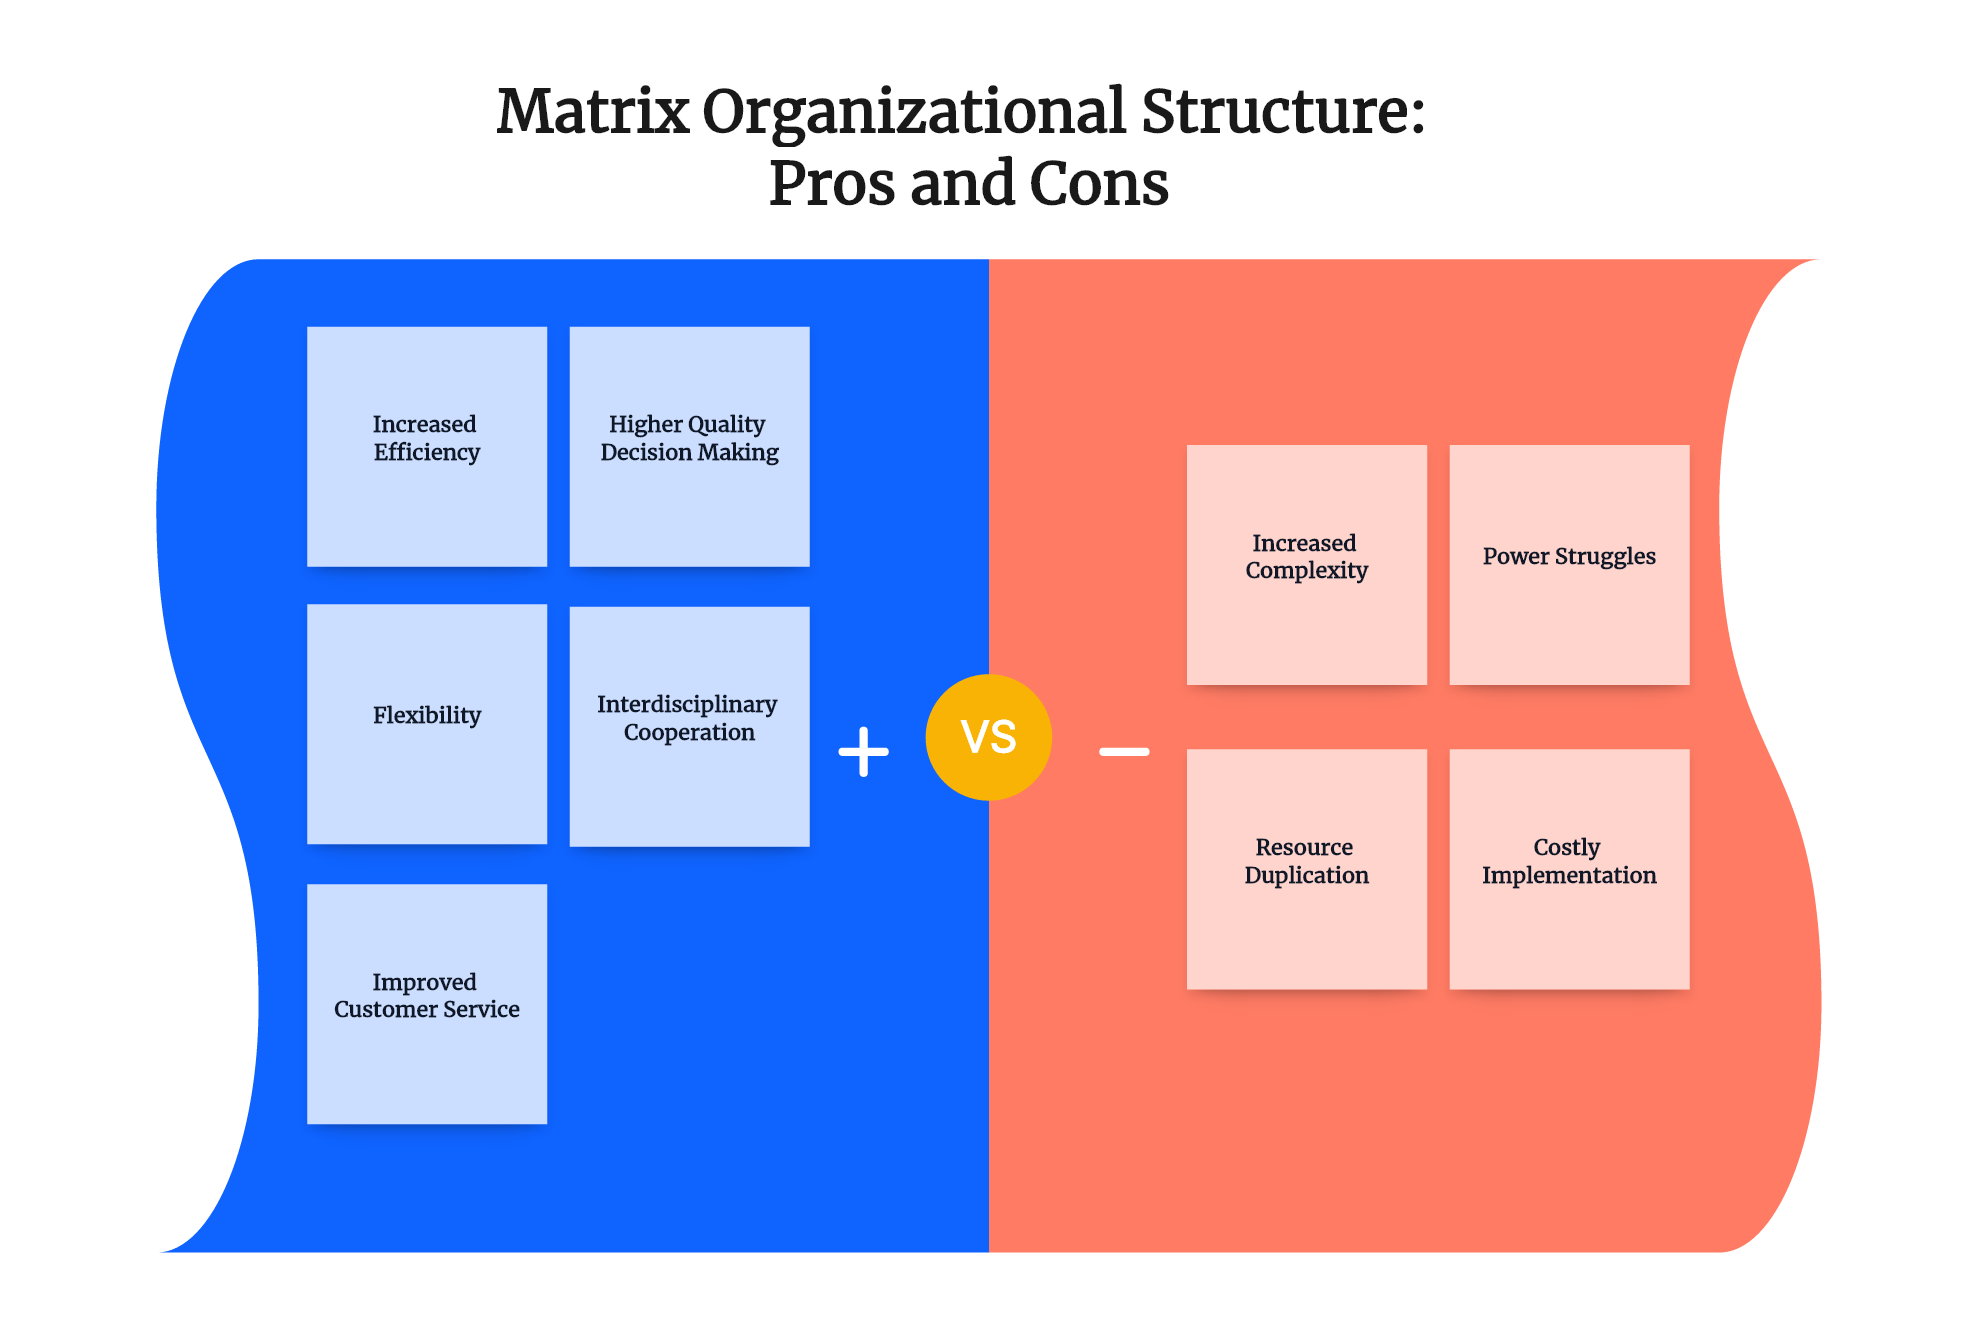 Matrix Organizational Structure: Pros and Cons